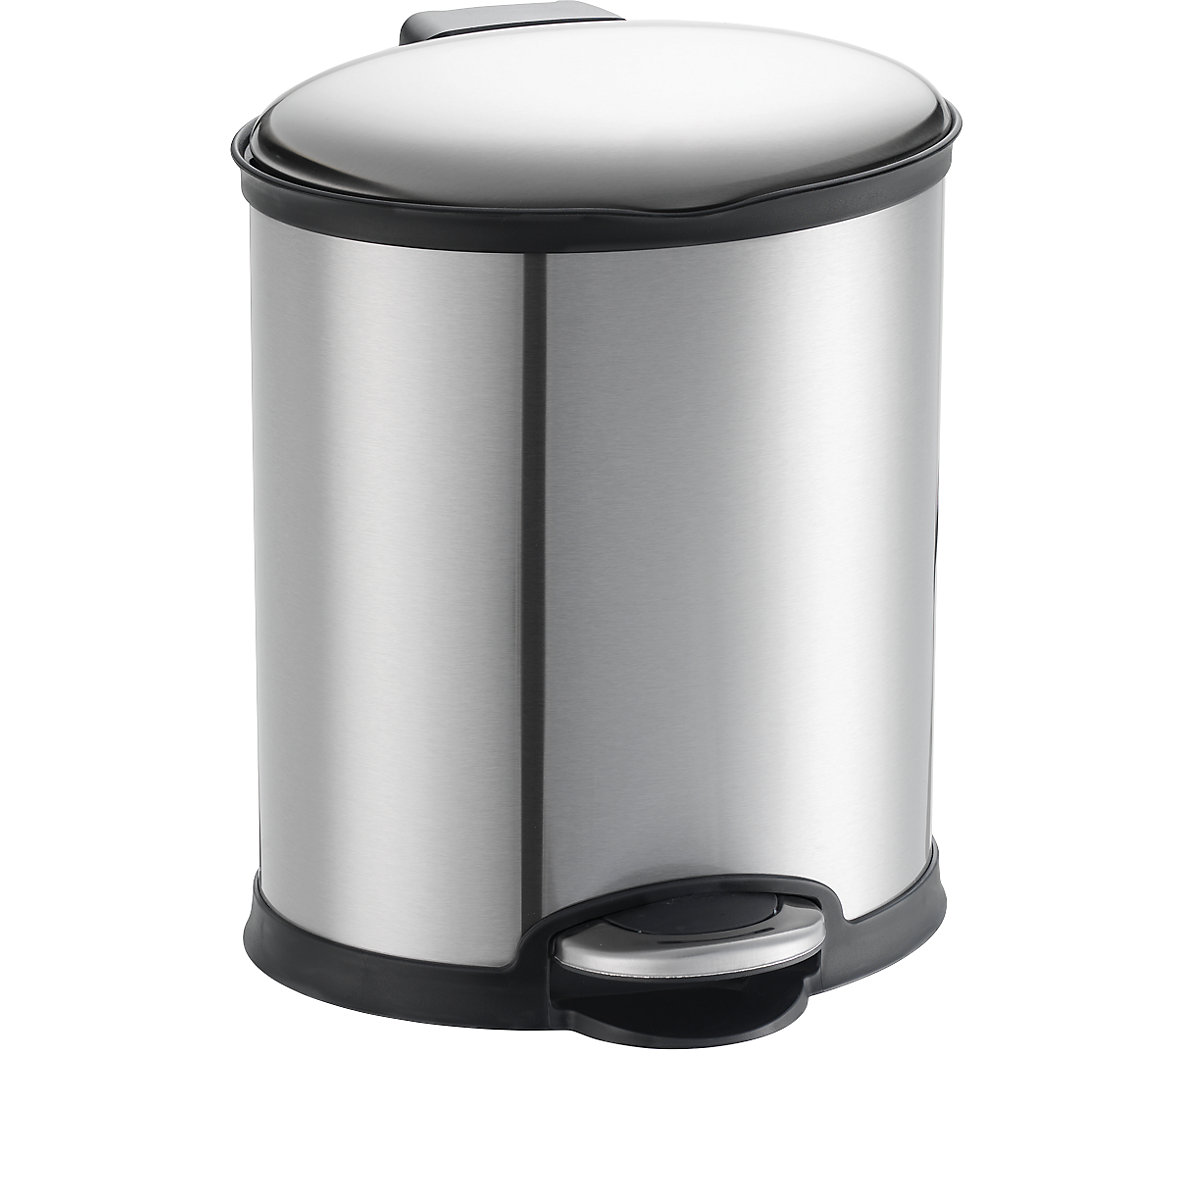 Oval waste collector with pedal – EKO